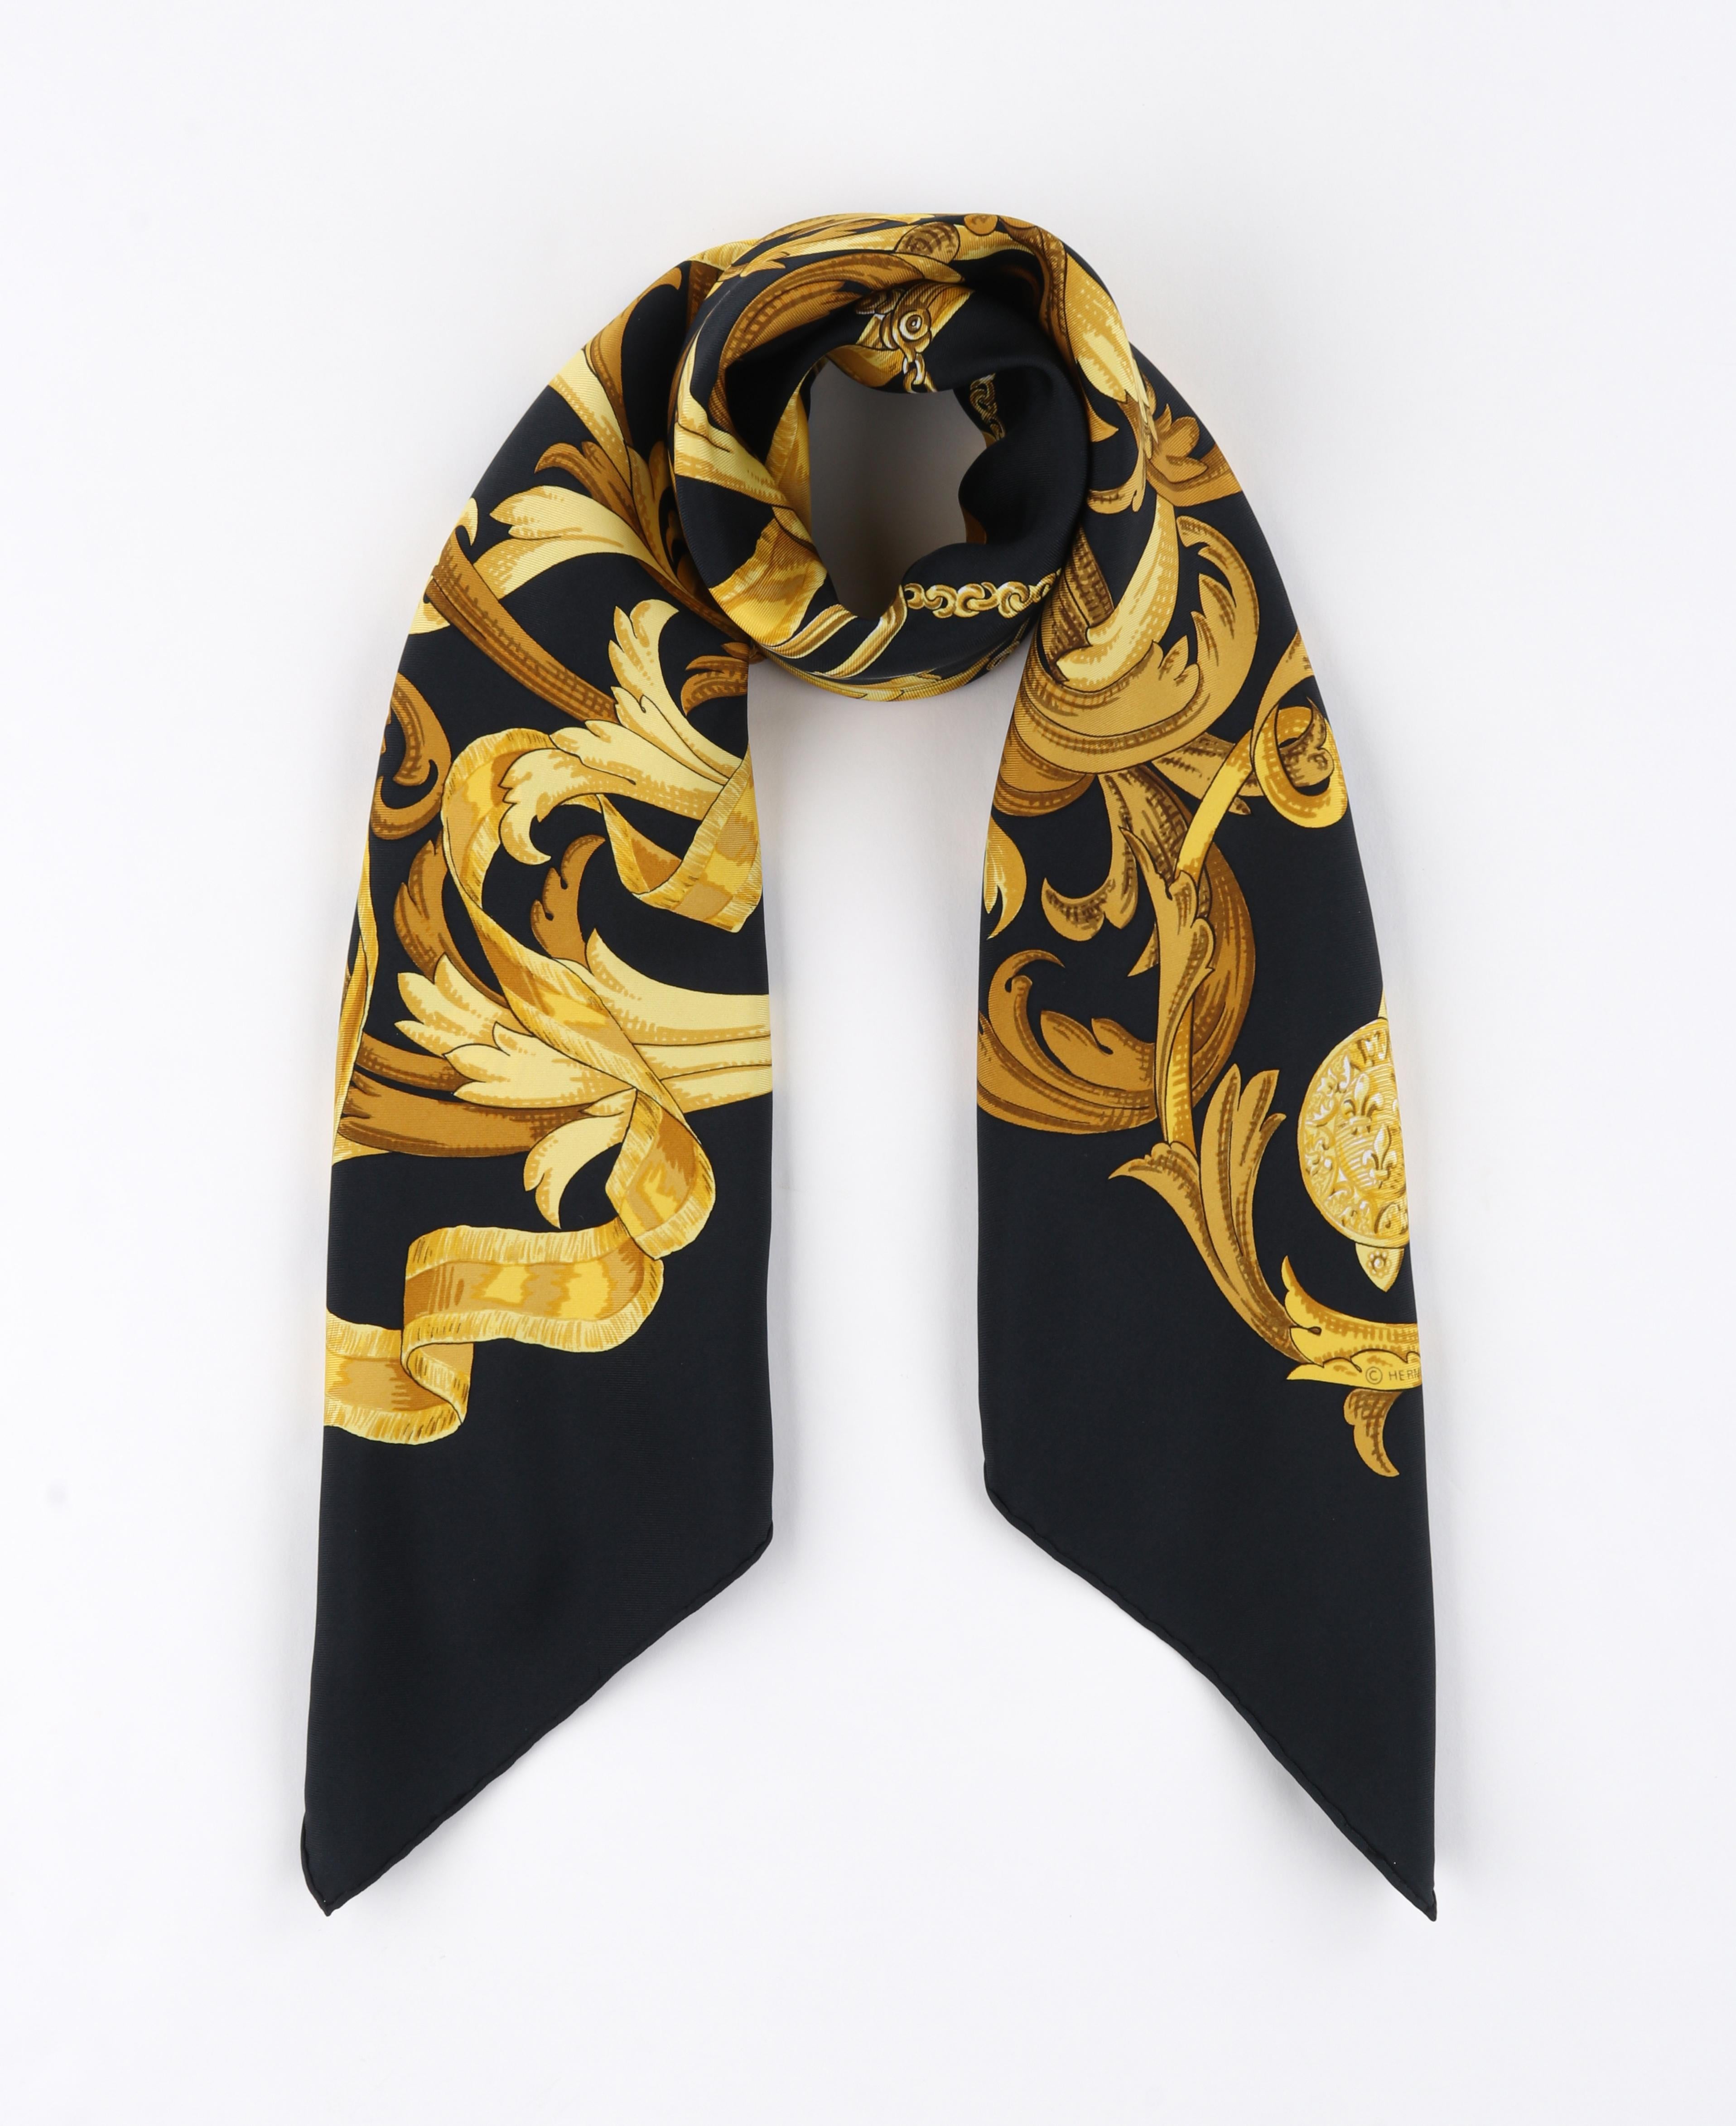 HERMES Henri D’Origny “Le Mors A La Conetable” Dark Blue Gold Equestrian Print Scarf
 
Brand/Manufacturer: Hermes
Circa: 1970/1990 Reissue
Designer: Henri D’Origny 
Style: Square scarf
Color(s): Shades of blue, yellow, brown, gold
Lined: No
Unmarked